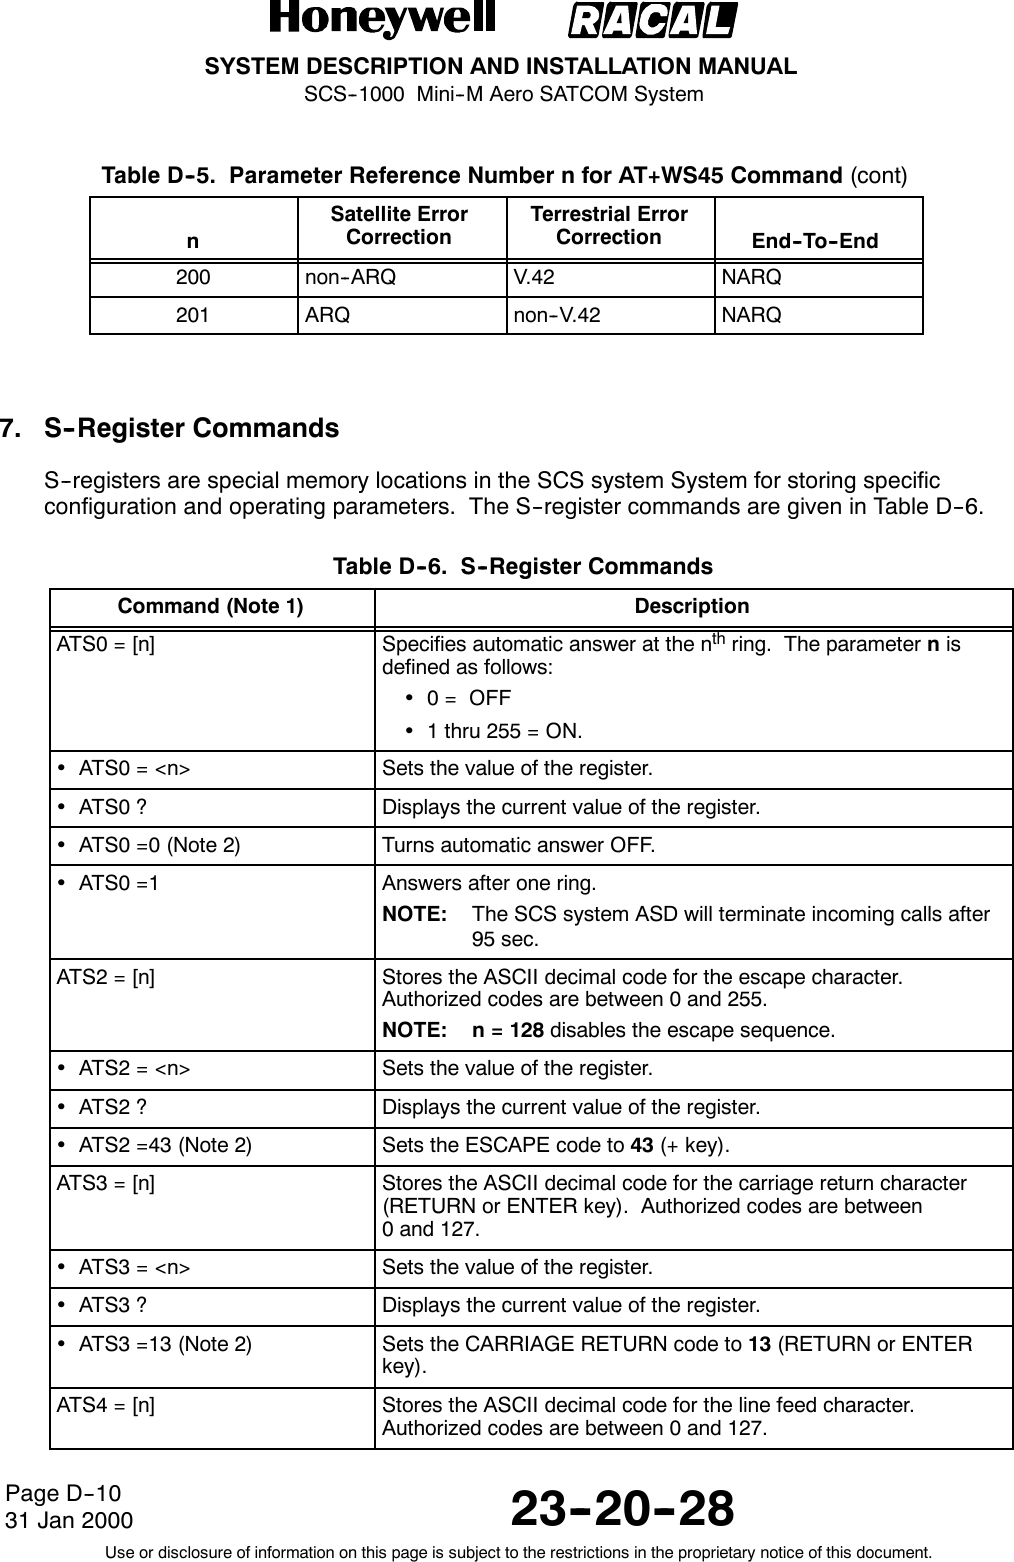 SYSTEM DESCRIPTION AND INSTALLATION MANUALSCS--1000 Mini--M Aero SATCOM System23--20--28Use or disclosure of information on this page is subject to the restrictions in the proprietary notice of this document.Page D--1031 Jan 2000Table D--5. Parameter Reference Number n for AT+WS45 Command (cont)n E n d -- T o -- E n dTerrestrial ErrorCorrectionSatellite ErrorCorrection200 non--ARQ V.42 NARQ201 ARQ non--V.42 NARQ7. S--Register CommandsS--registers are special memory locations in the SCS system System for storing specificconfiguration and operating parameters. The S--register commands are given in Table D--6.Table D--6. S--Register CommandsCommand (Note 1) DescriptionATS0 = [n] Specifies automatic answer at the nth ring. The parameter nisdefined as follows:0= OFF1 thru 255 = ON.ATS0 = &lt;n&gt; Sets the value of the register.ATS0 ? Displays the current value of the register.ATS0 =0 (Note 2) Turns automatic answer OFF.ATS0 =1 Answers after one ring.NOTE: The SCS system ASD will terminate incoming calls after95 sec.ATS2 = [n] Stores the ASCII decimal code for the escape character.Authorized codes are between 0 and 255.NOTE: n = 128 disables the escape sequence.ATS2 = &lt;n&gt; Sets the value of the register.ATS2 ? Displays the current value of the register.ATS2 =43 (Note 2) Sets the ESCAPE code to 43 (+ key).ATS3 = [n] Stores the ASCII decimal code for the carriage return character(RETURN or ENTER key). Authorized codes are between0 and 127.ATS3 = &lt;n&gt; Sets the value of the register.ATS3 ? Displays the current value of the register.ATS3 =13 (Note 2) Sets the CARRIAGE RETURN code to 13 (RETURN or ENTERkey).ATS4 = [n] Stores the ASCII decimal code for the line feed character.Authorized codes are between 0 and 127.